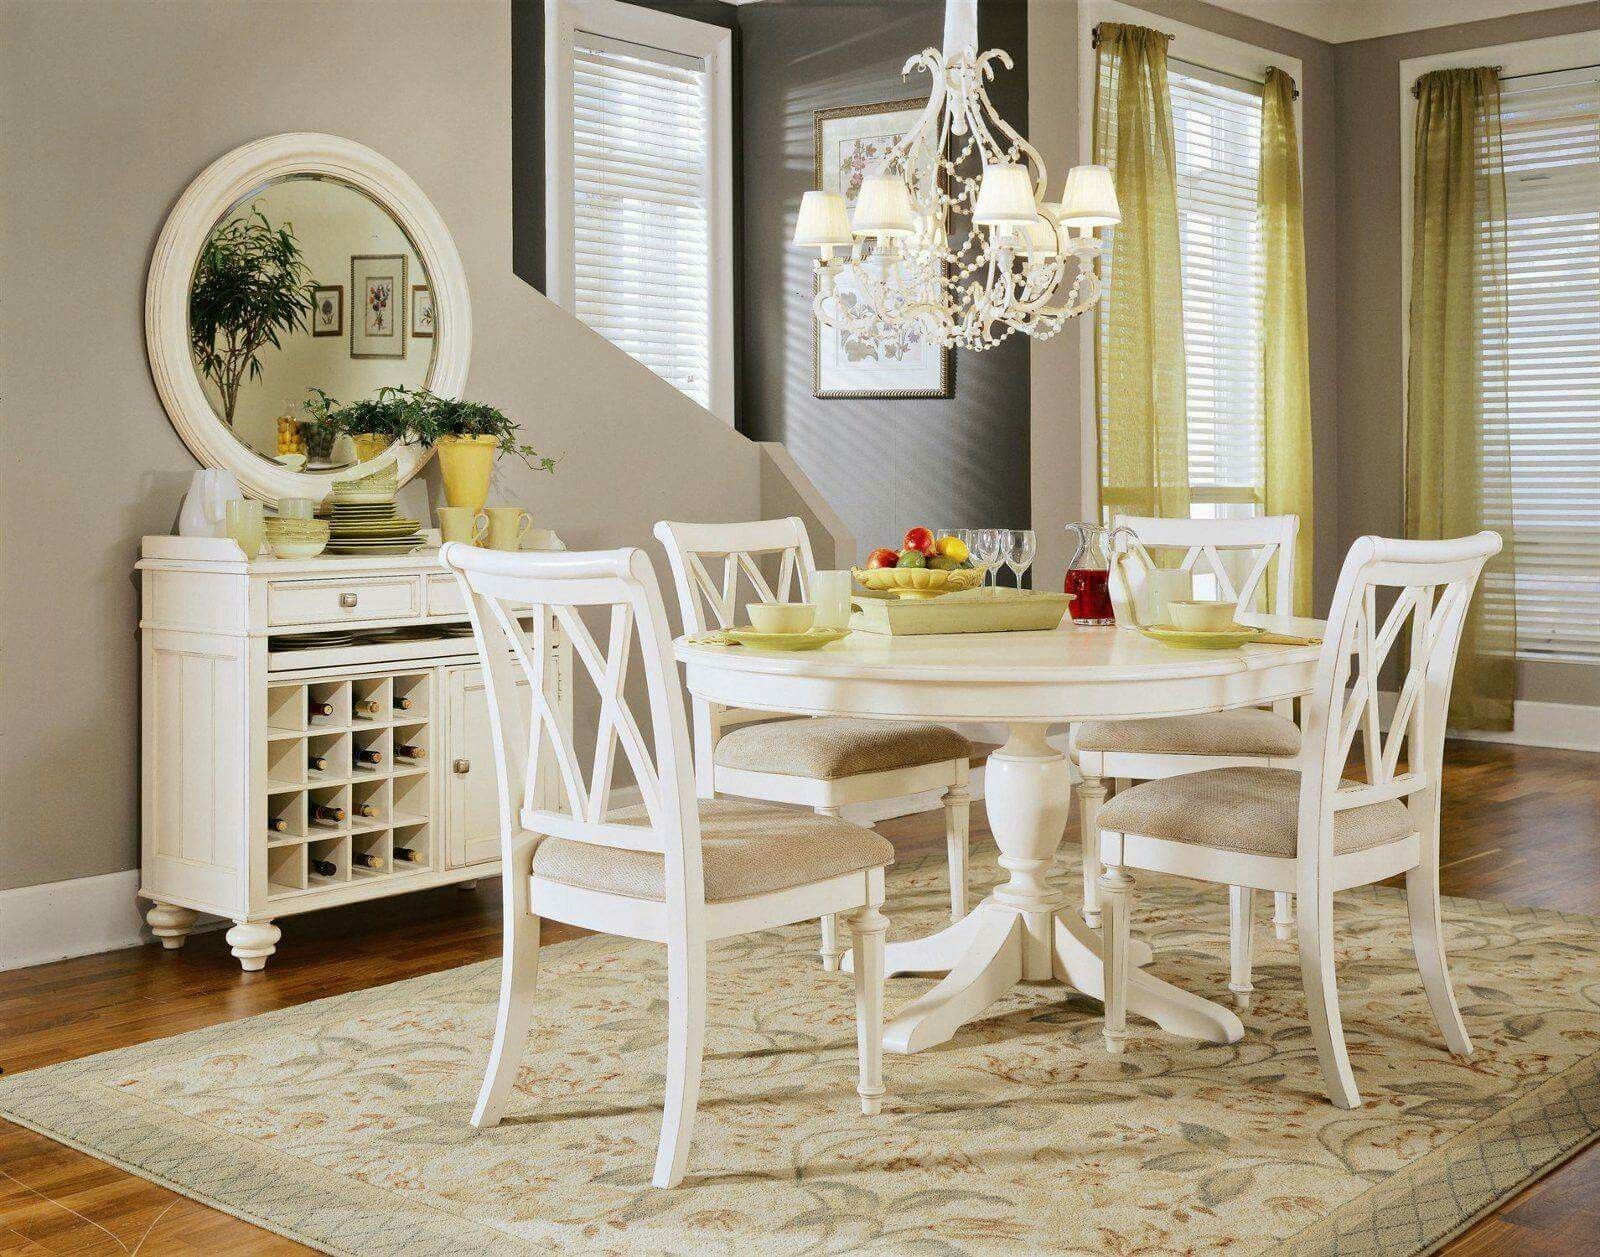 Pc white round pedestal dining table set traditional dining tables